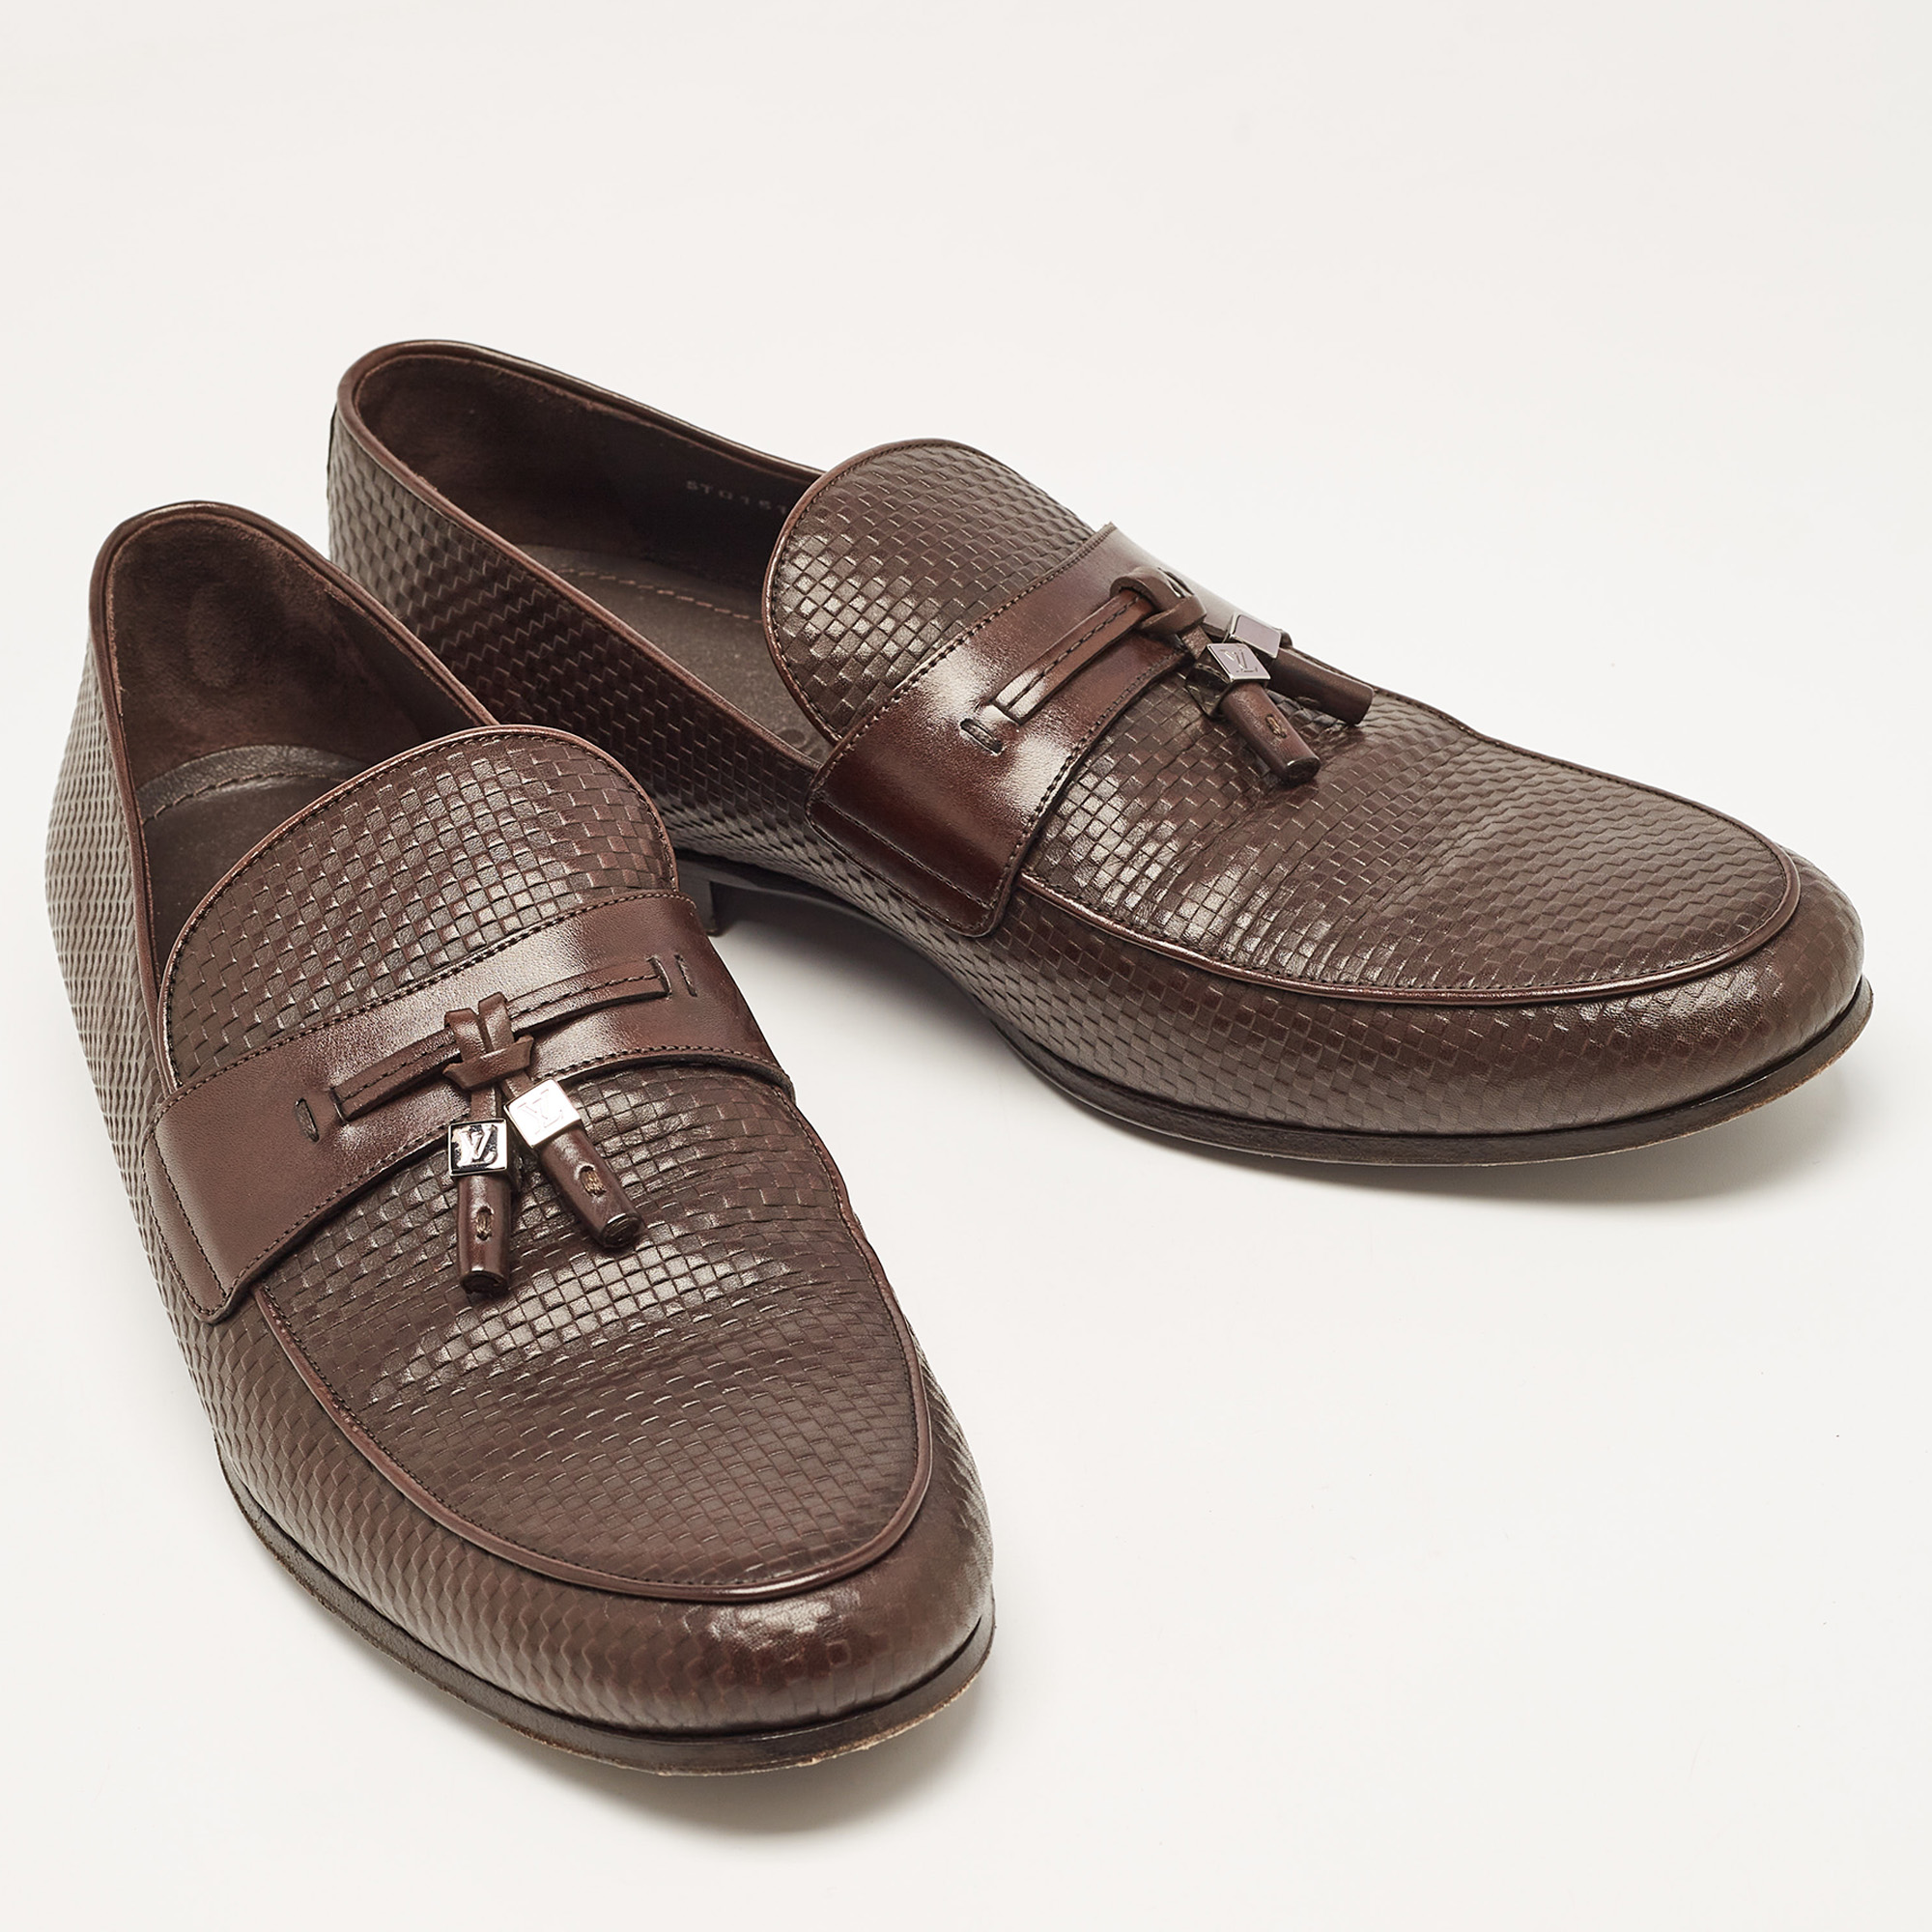 Louis Vuitton Brown Damier Leather Slip On Loafers Size 43